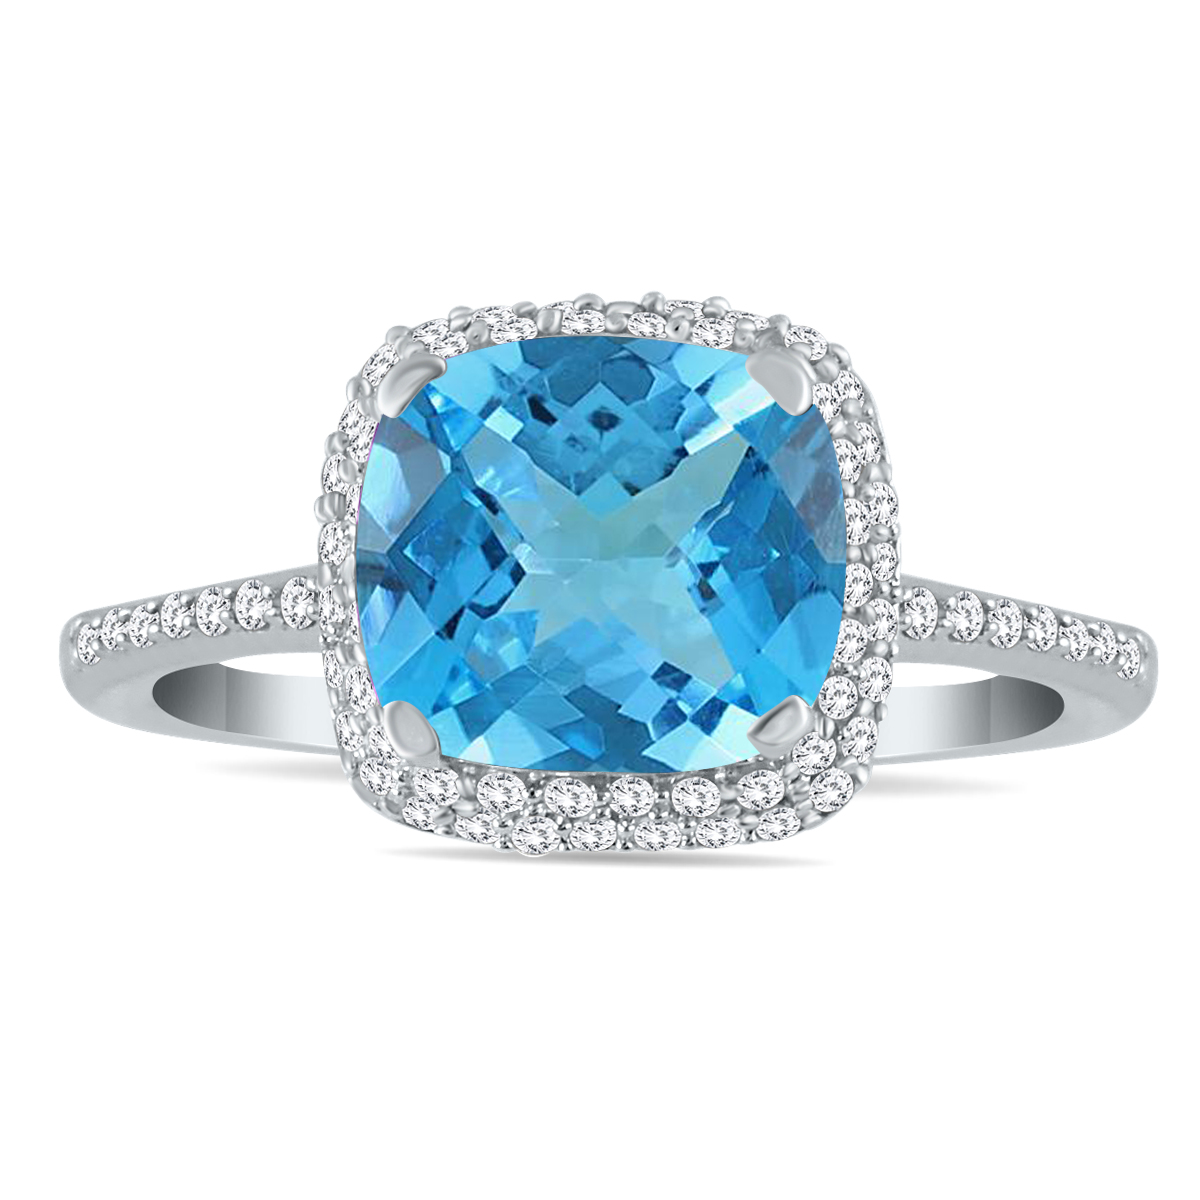 Cushion Cut Blue Topaz and Diamond Halo Ring in 10K White Gold